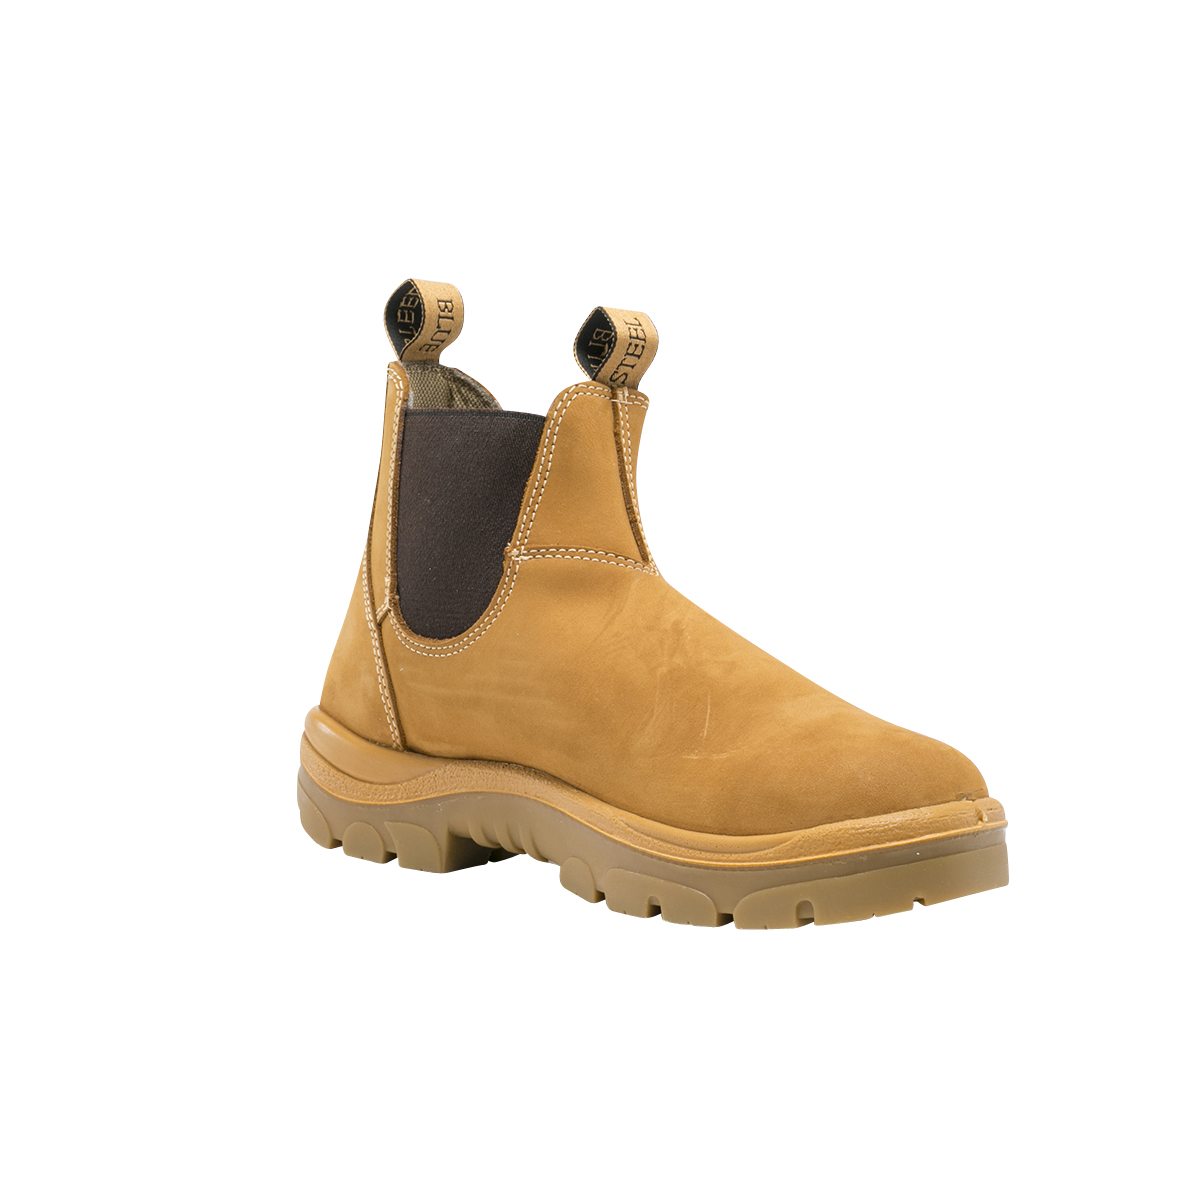 SAFETY BOOT HOBART WHEAT S10 -SLIP ON